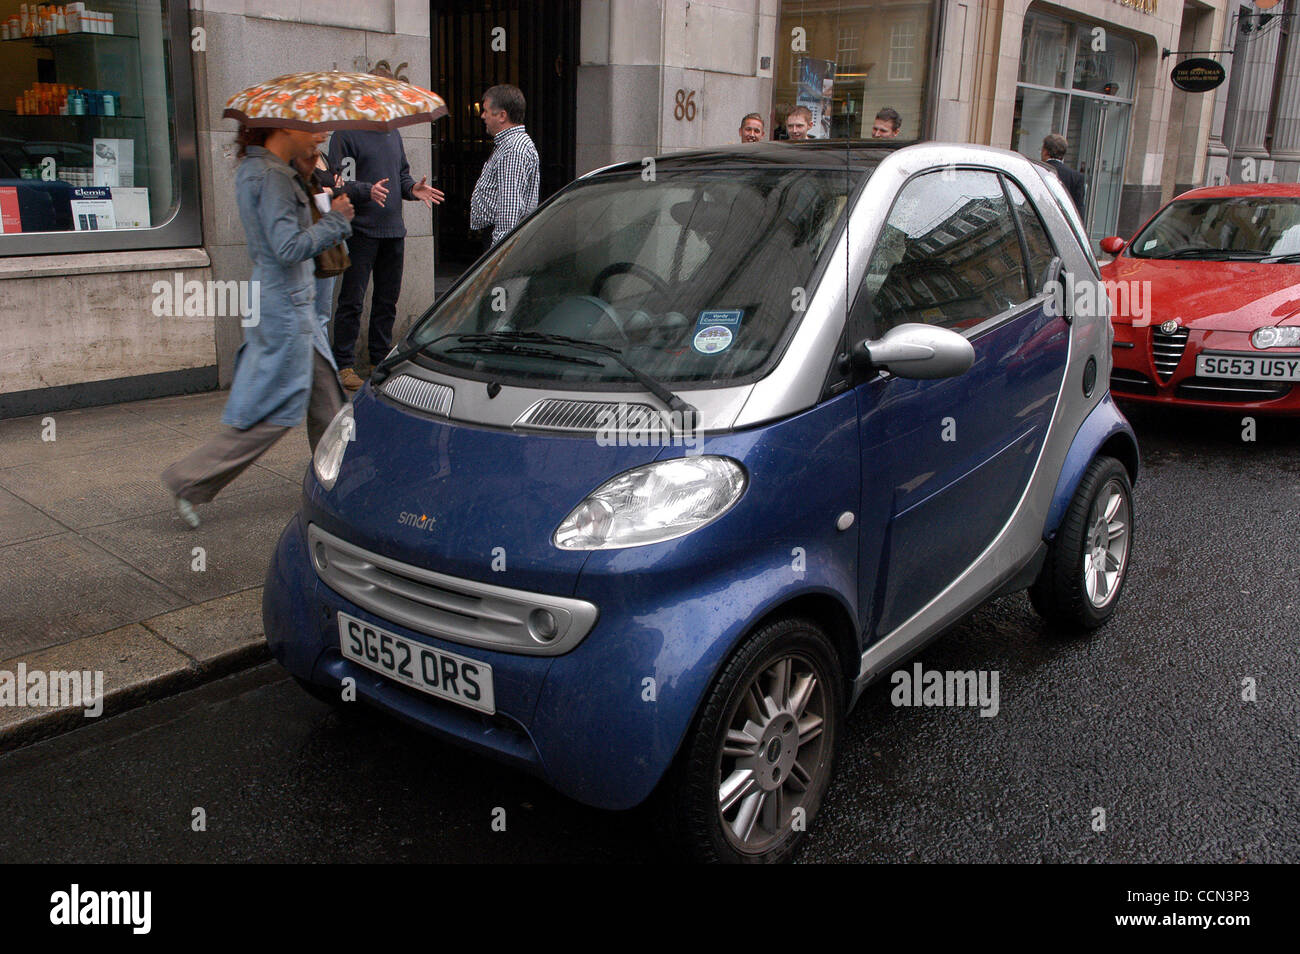 https://c8.alamy.com/comp/CCN3P3/tiny-two-seater-high-mileage-smart-car-parked-on-a-glasgow-scotland-CCN3P3.jpg